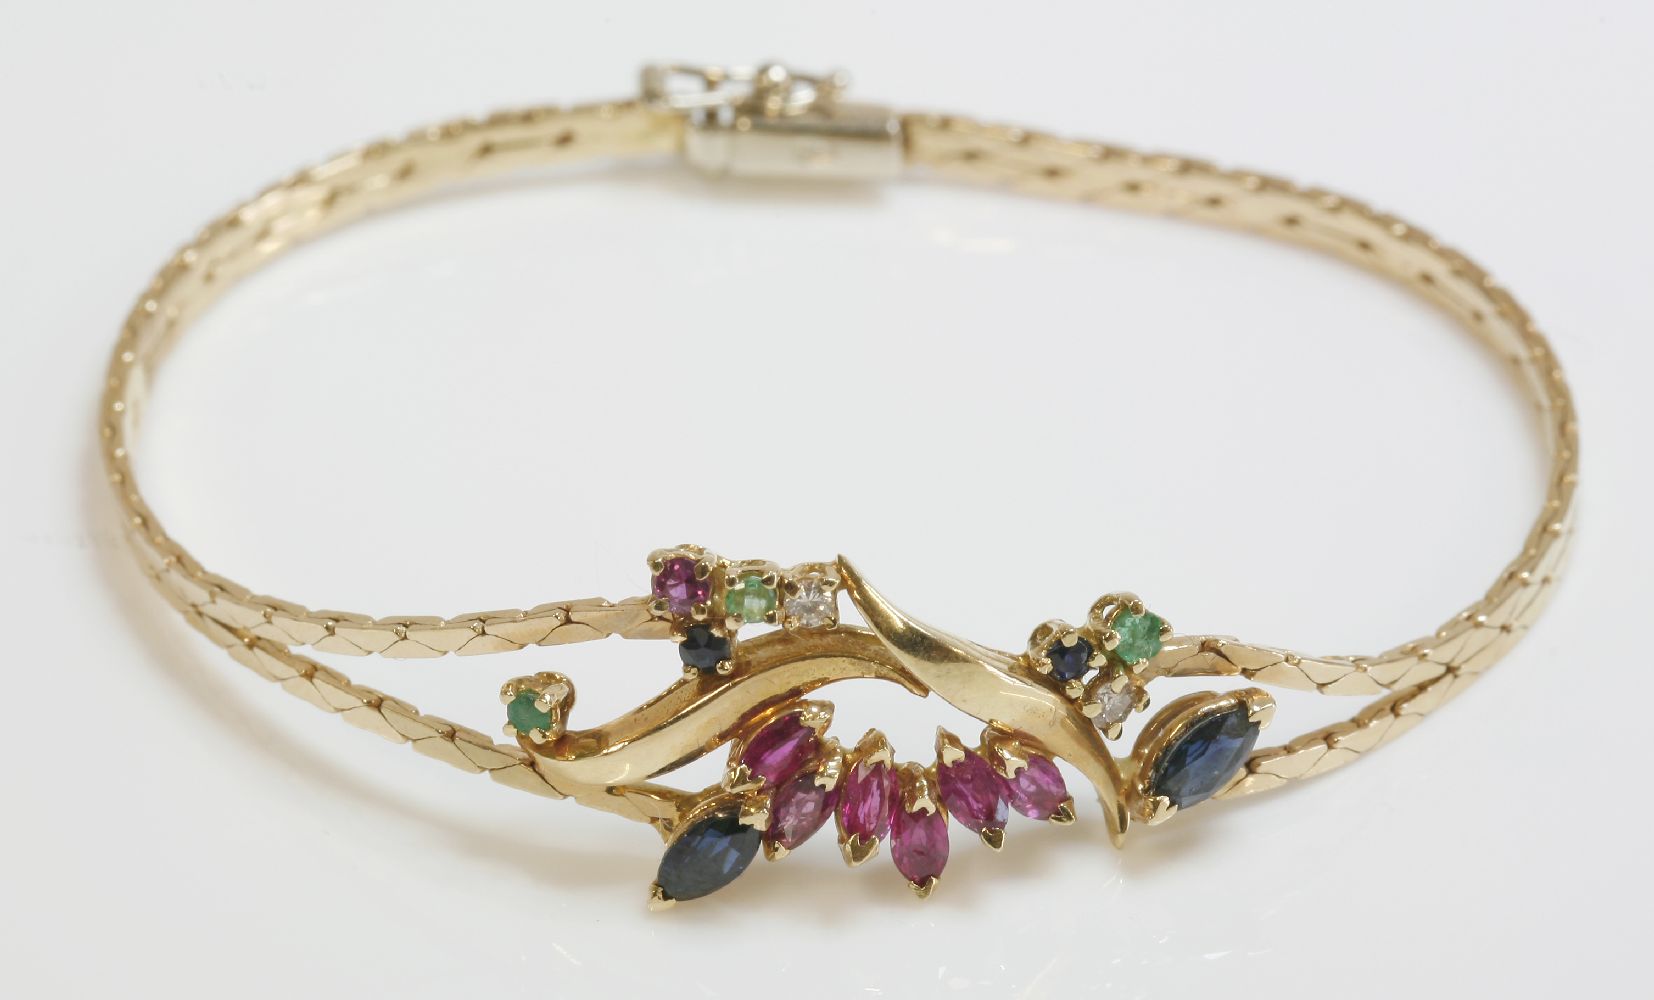 An Italian gold bracelet, composed of two rows of cobra chain with a dispersed cluster of rubies,